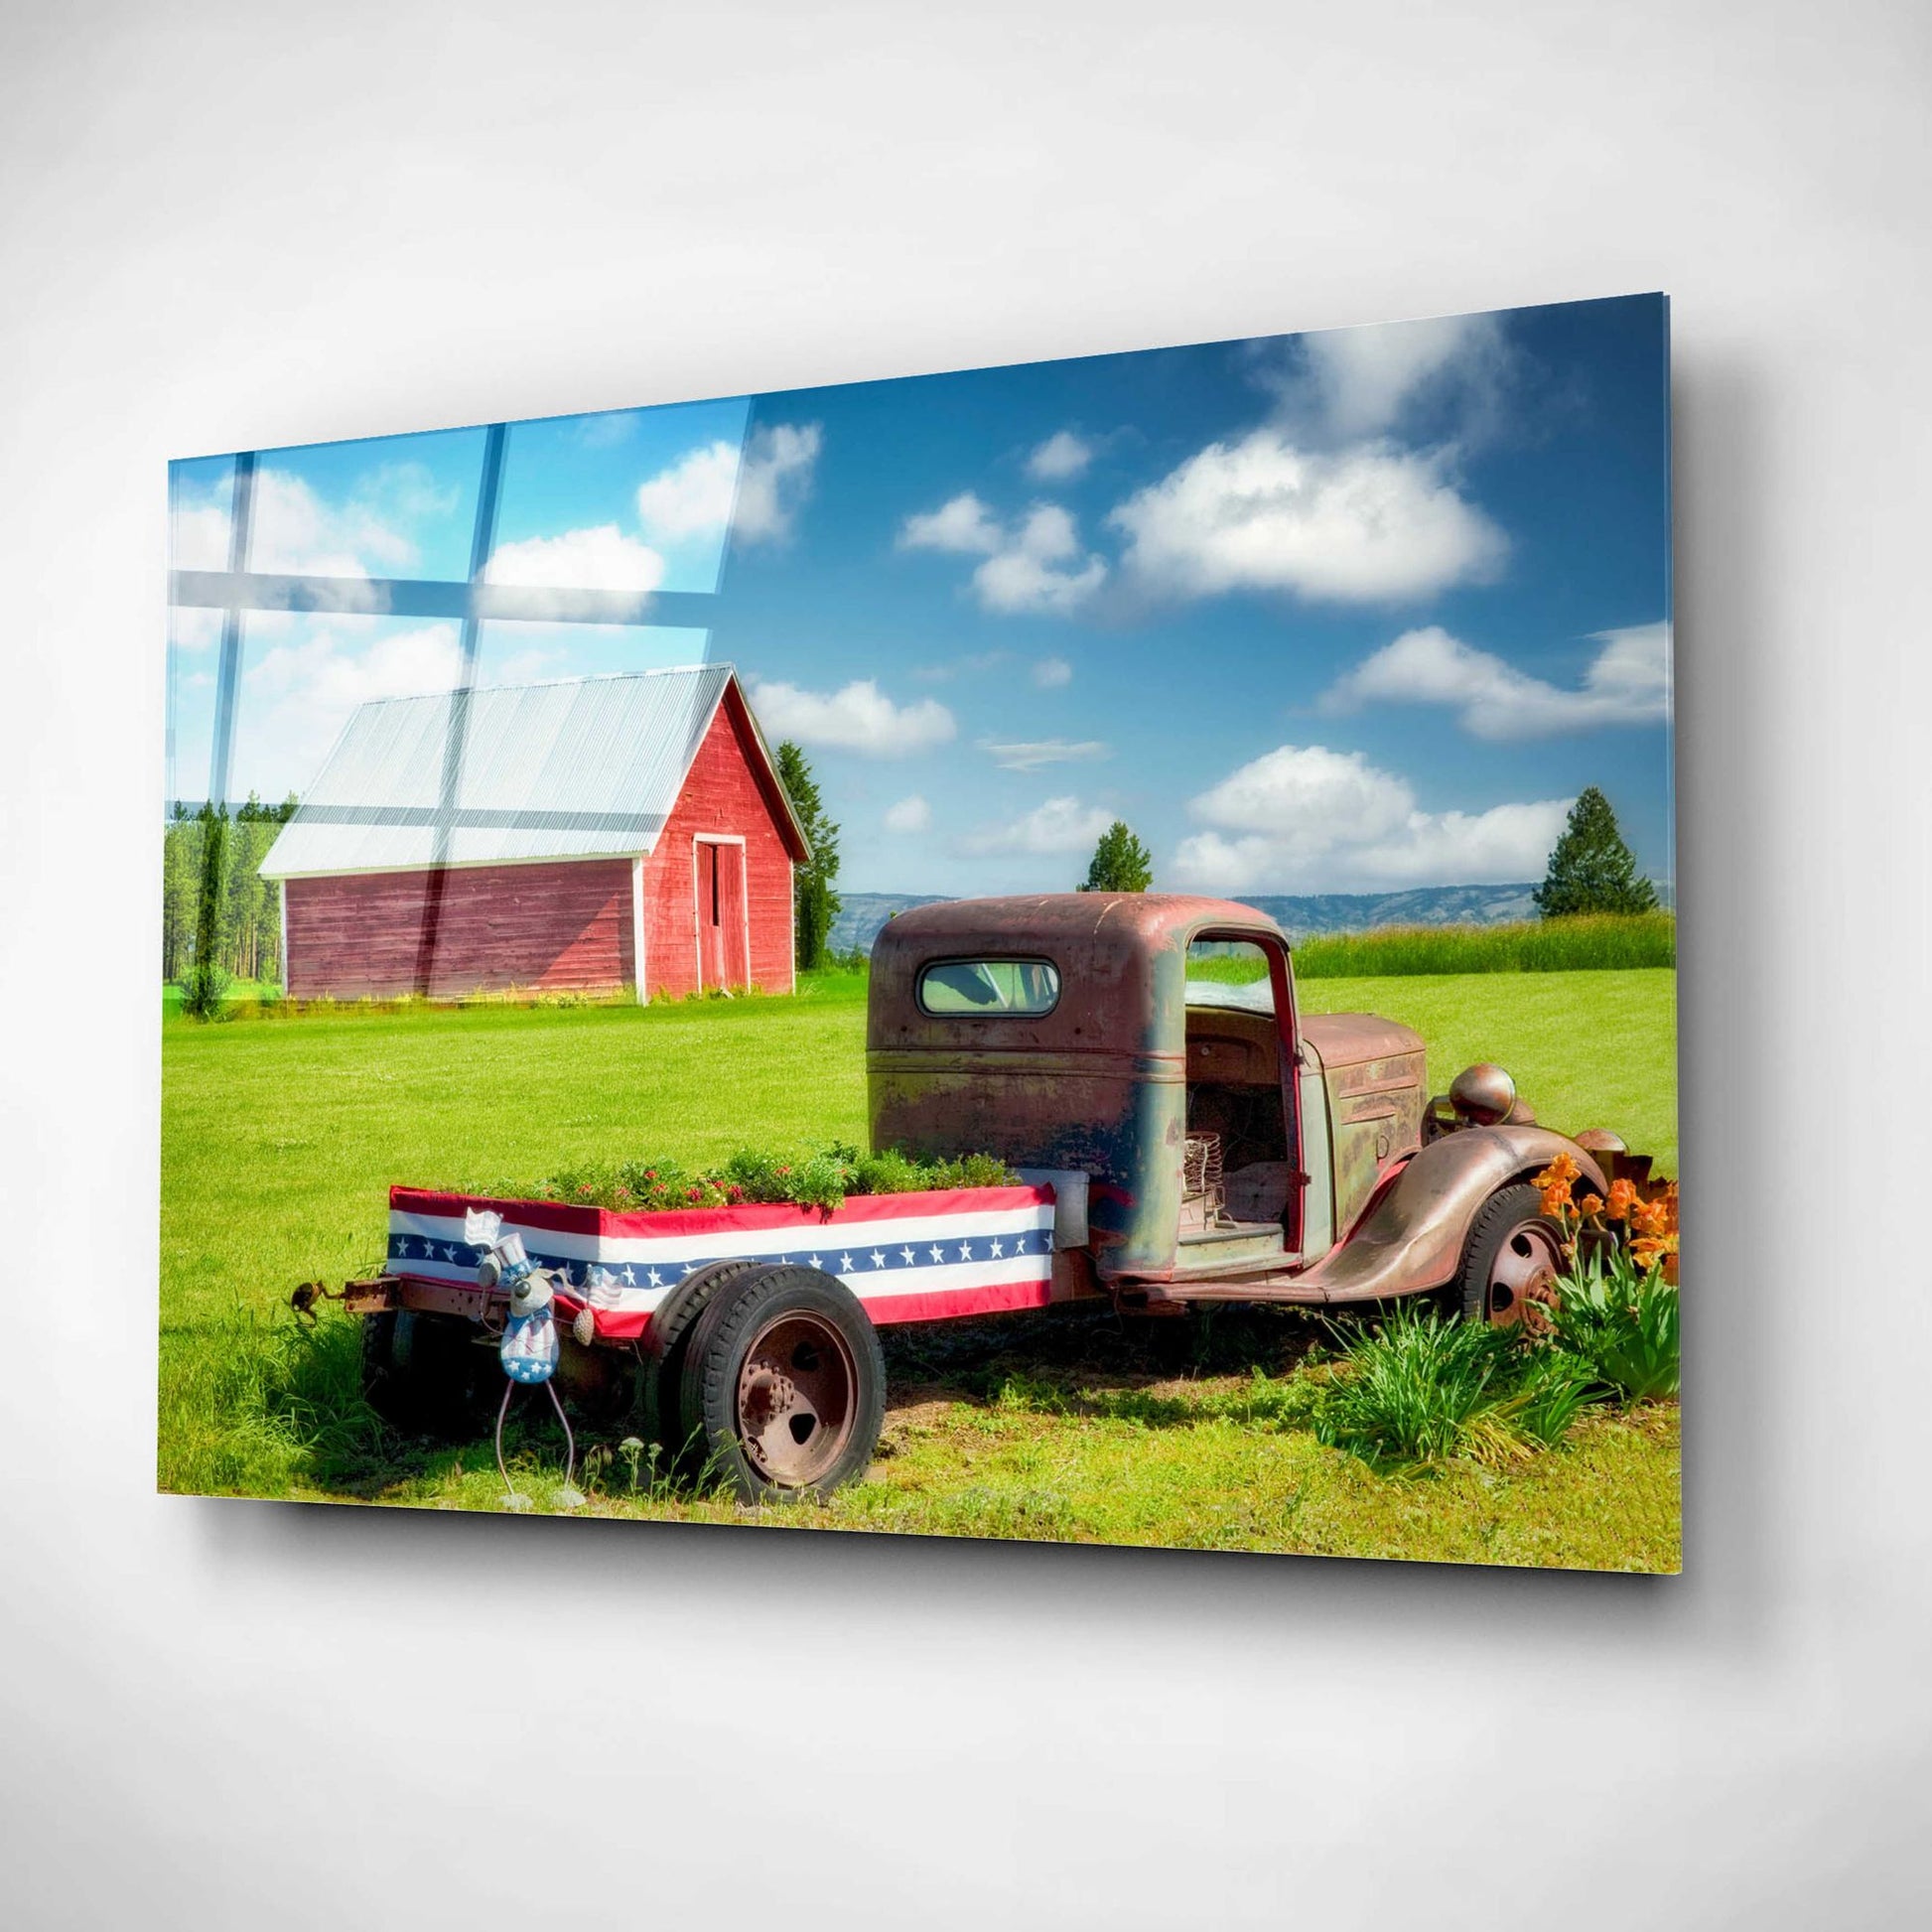 Epic Art 'Barn and Truck' by Dennis Frates, Acrylic Glass Wall Art,16x12